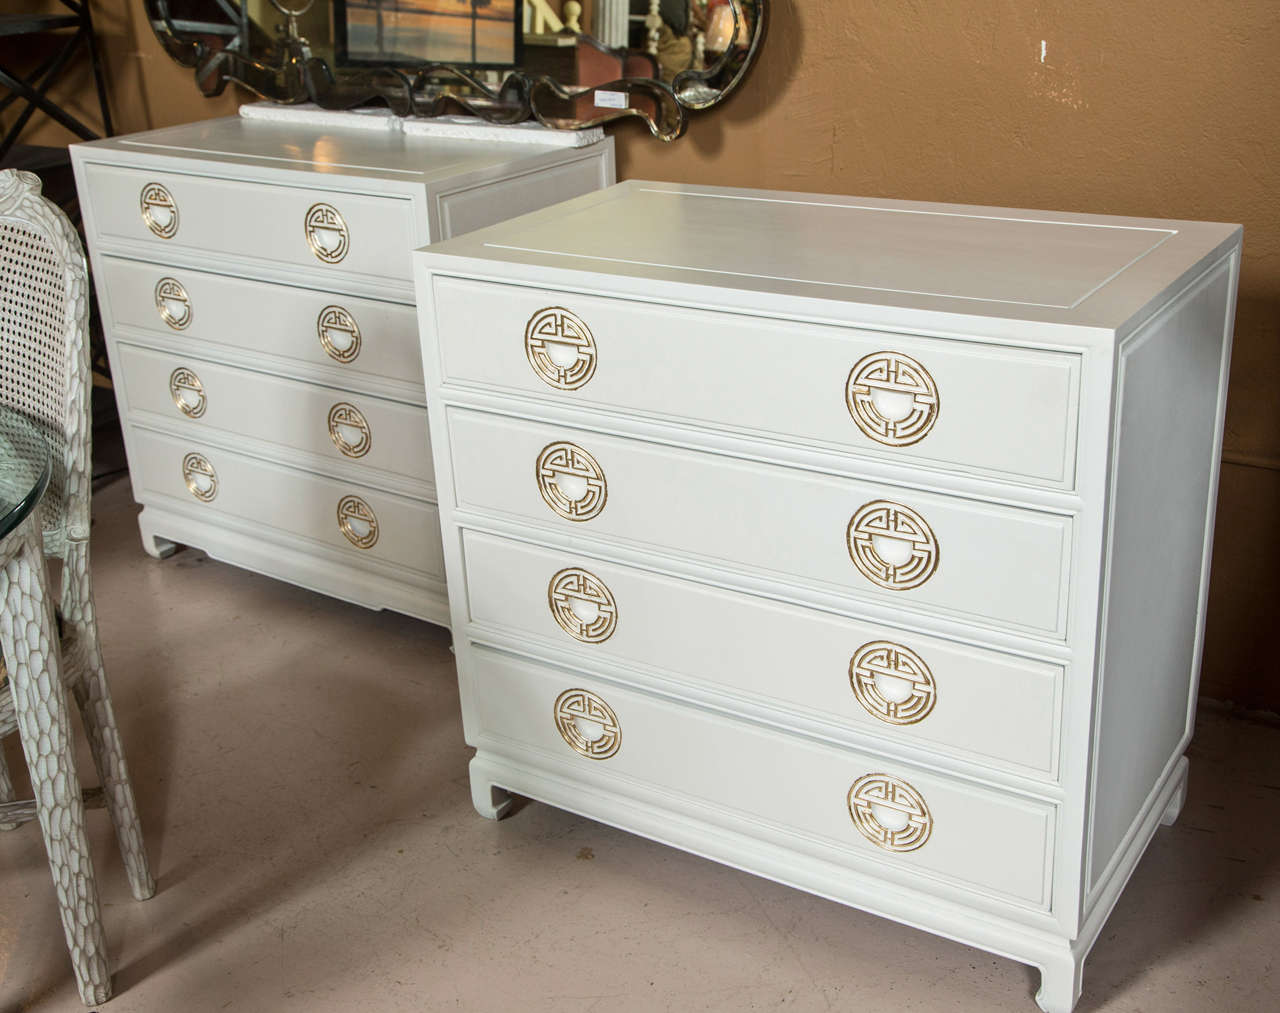 Pair of Chinese influenced bachelor chests or commodes. Part of our Winter White collection. This is a fine pair of Mid-Century Modern Chinese influenced chests. Each on bracket feet with four drawers and gilt gold pulls.